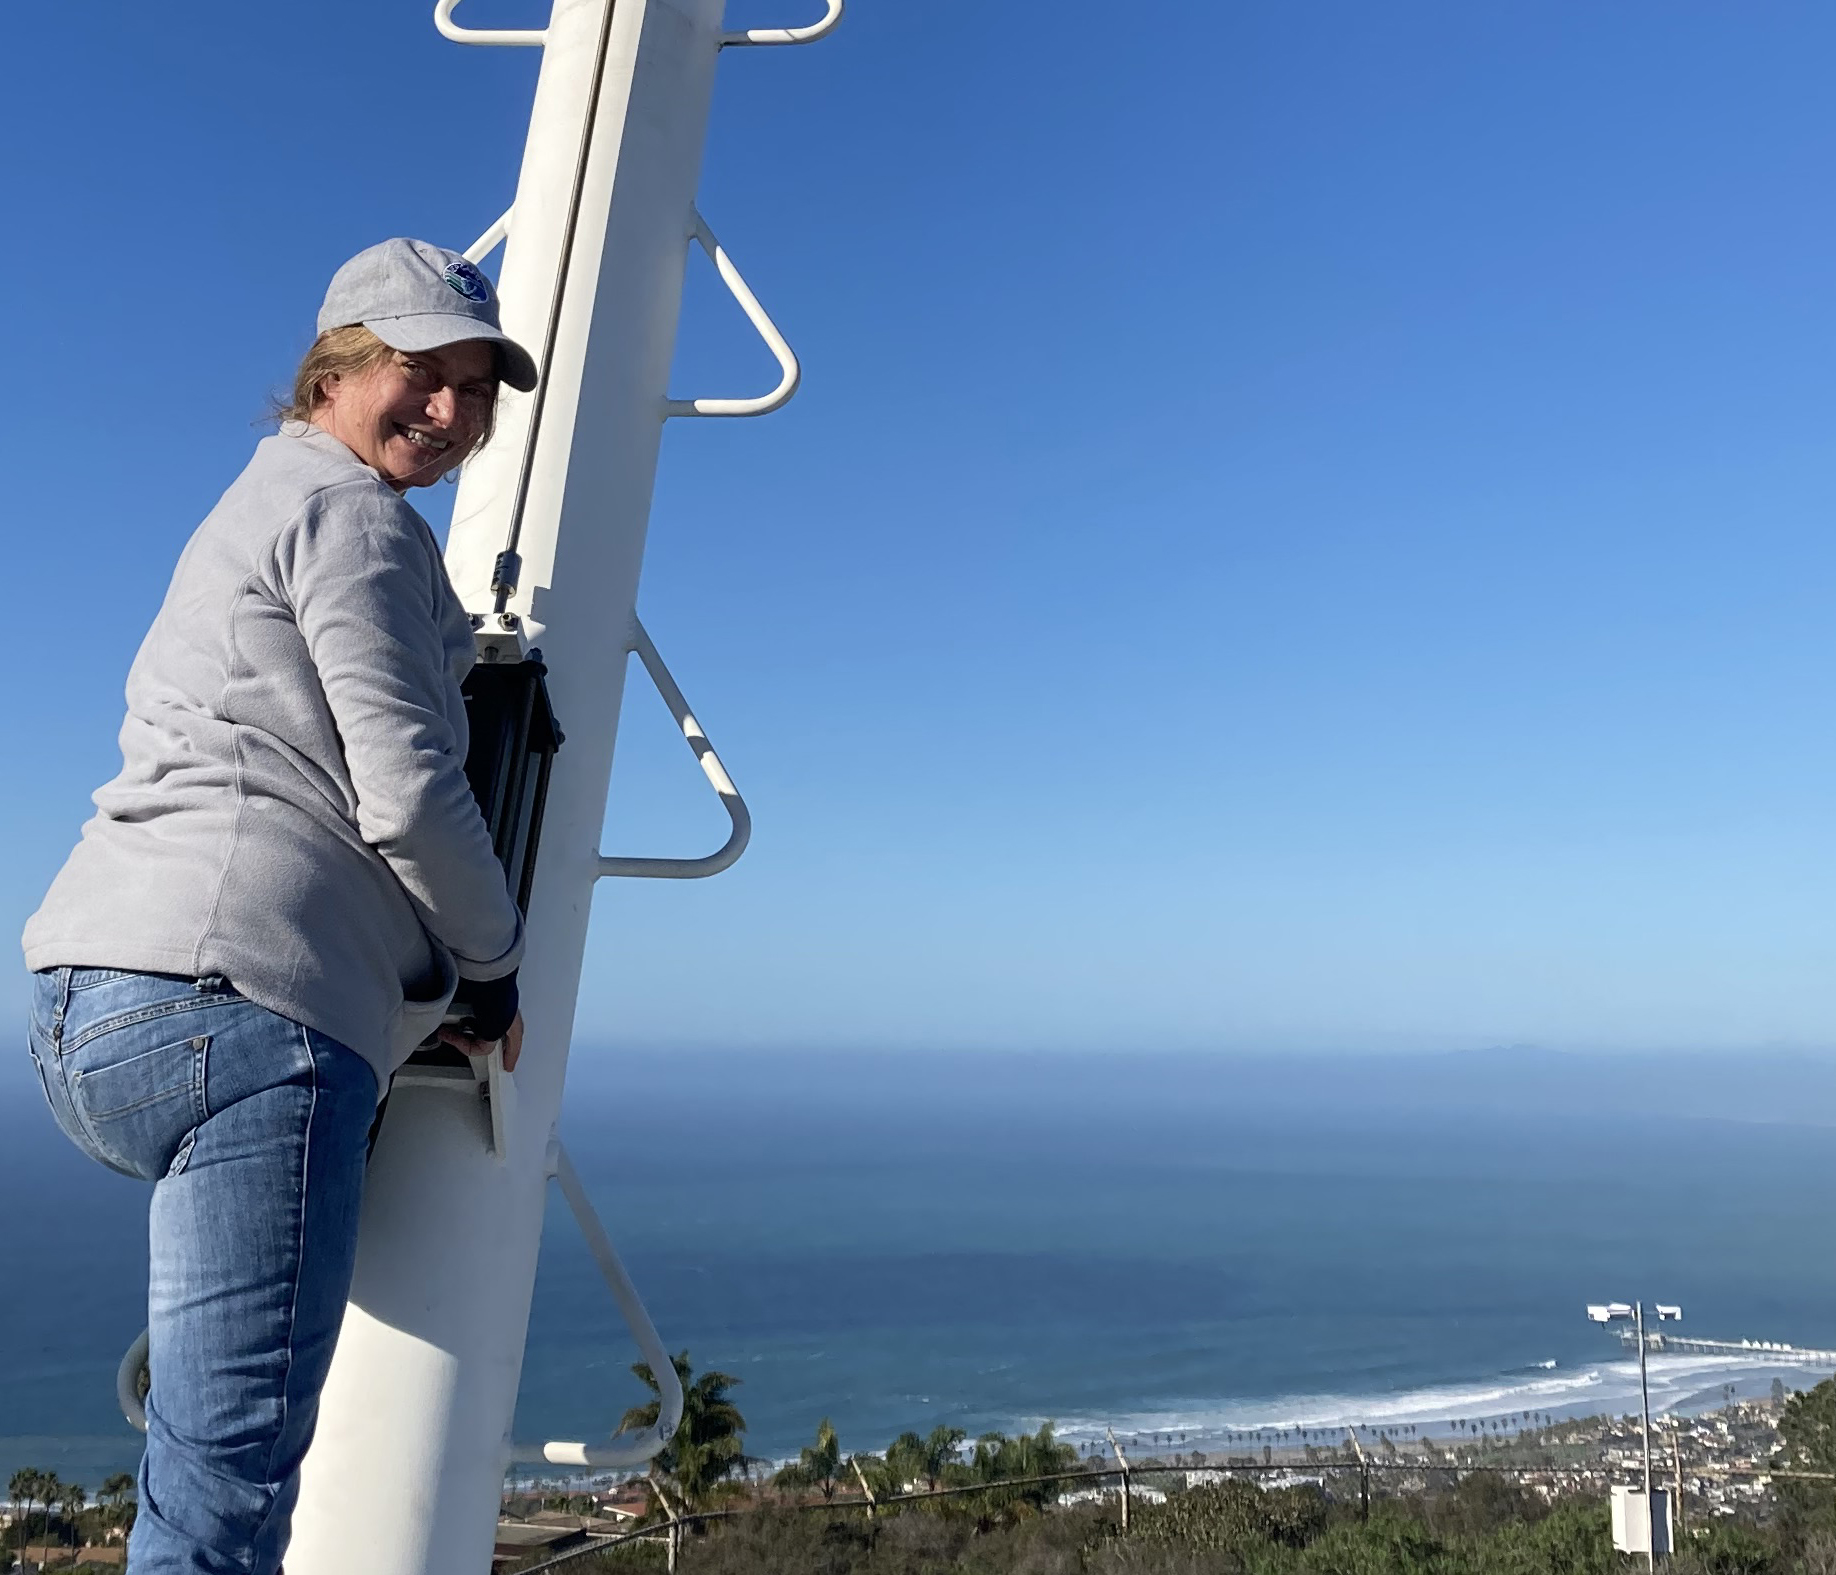 On a clear day in La Jolla, California, Lynn Russell stands on her aerosol sampling van overlooking trees, buildings, and the Pacific Ocean below.